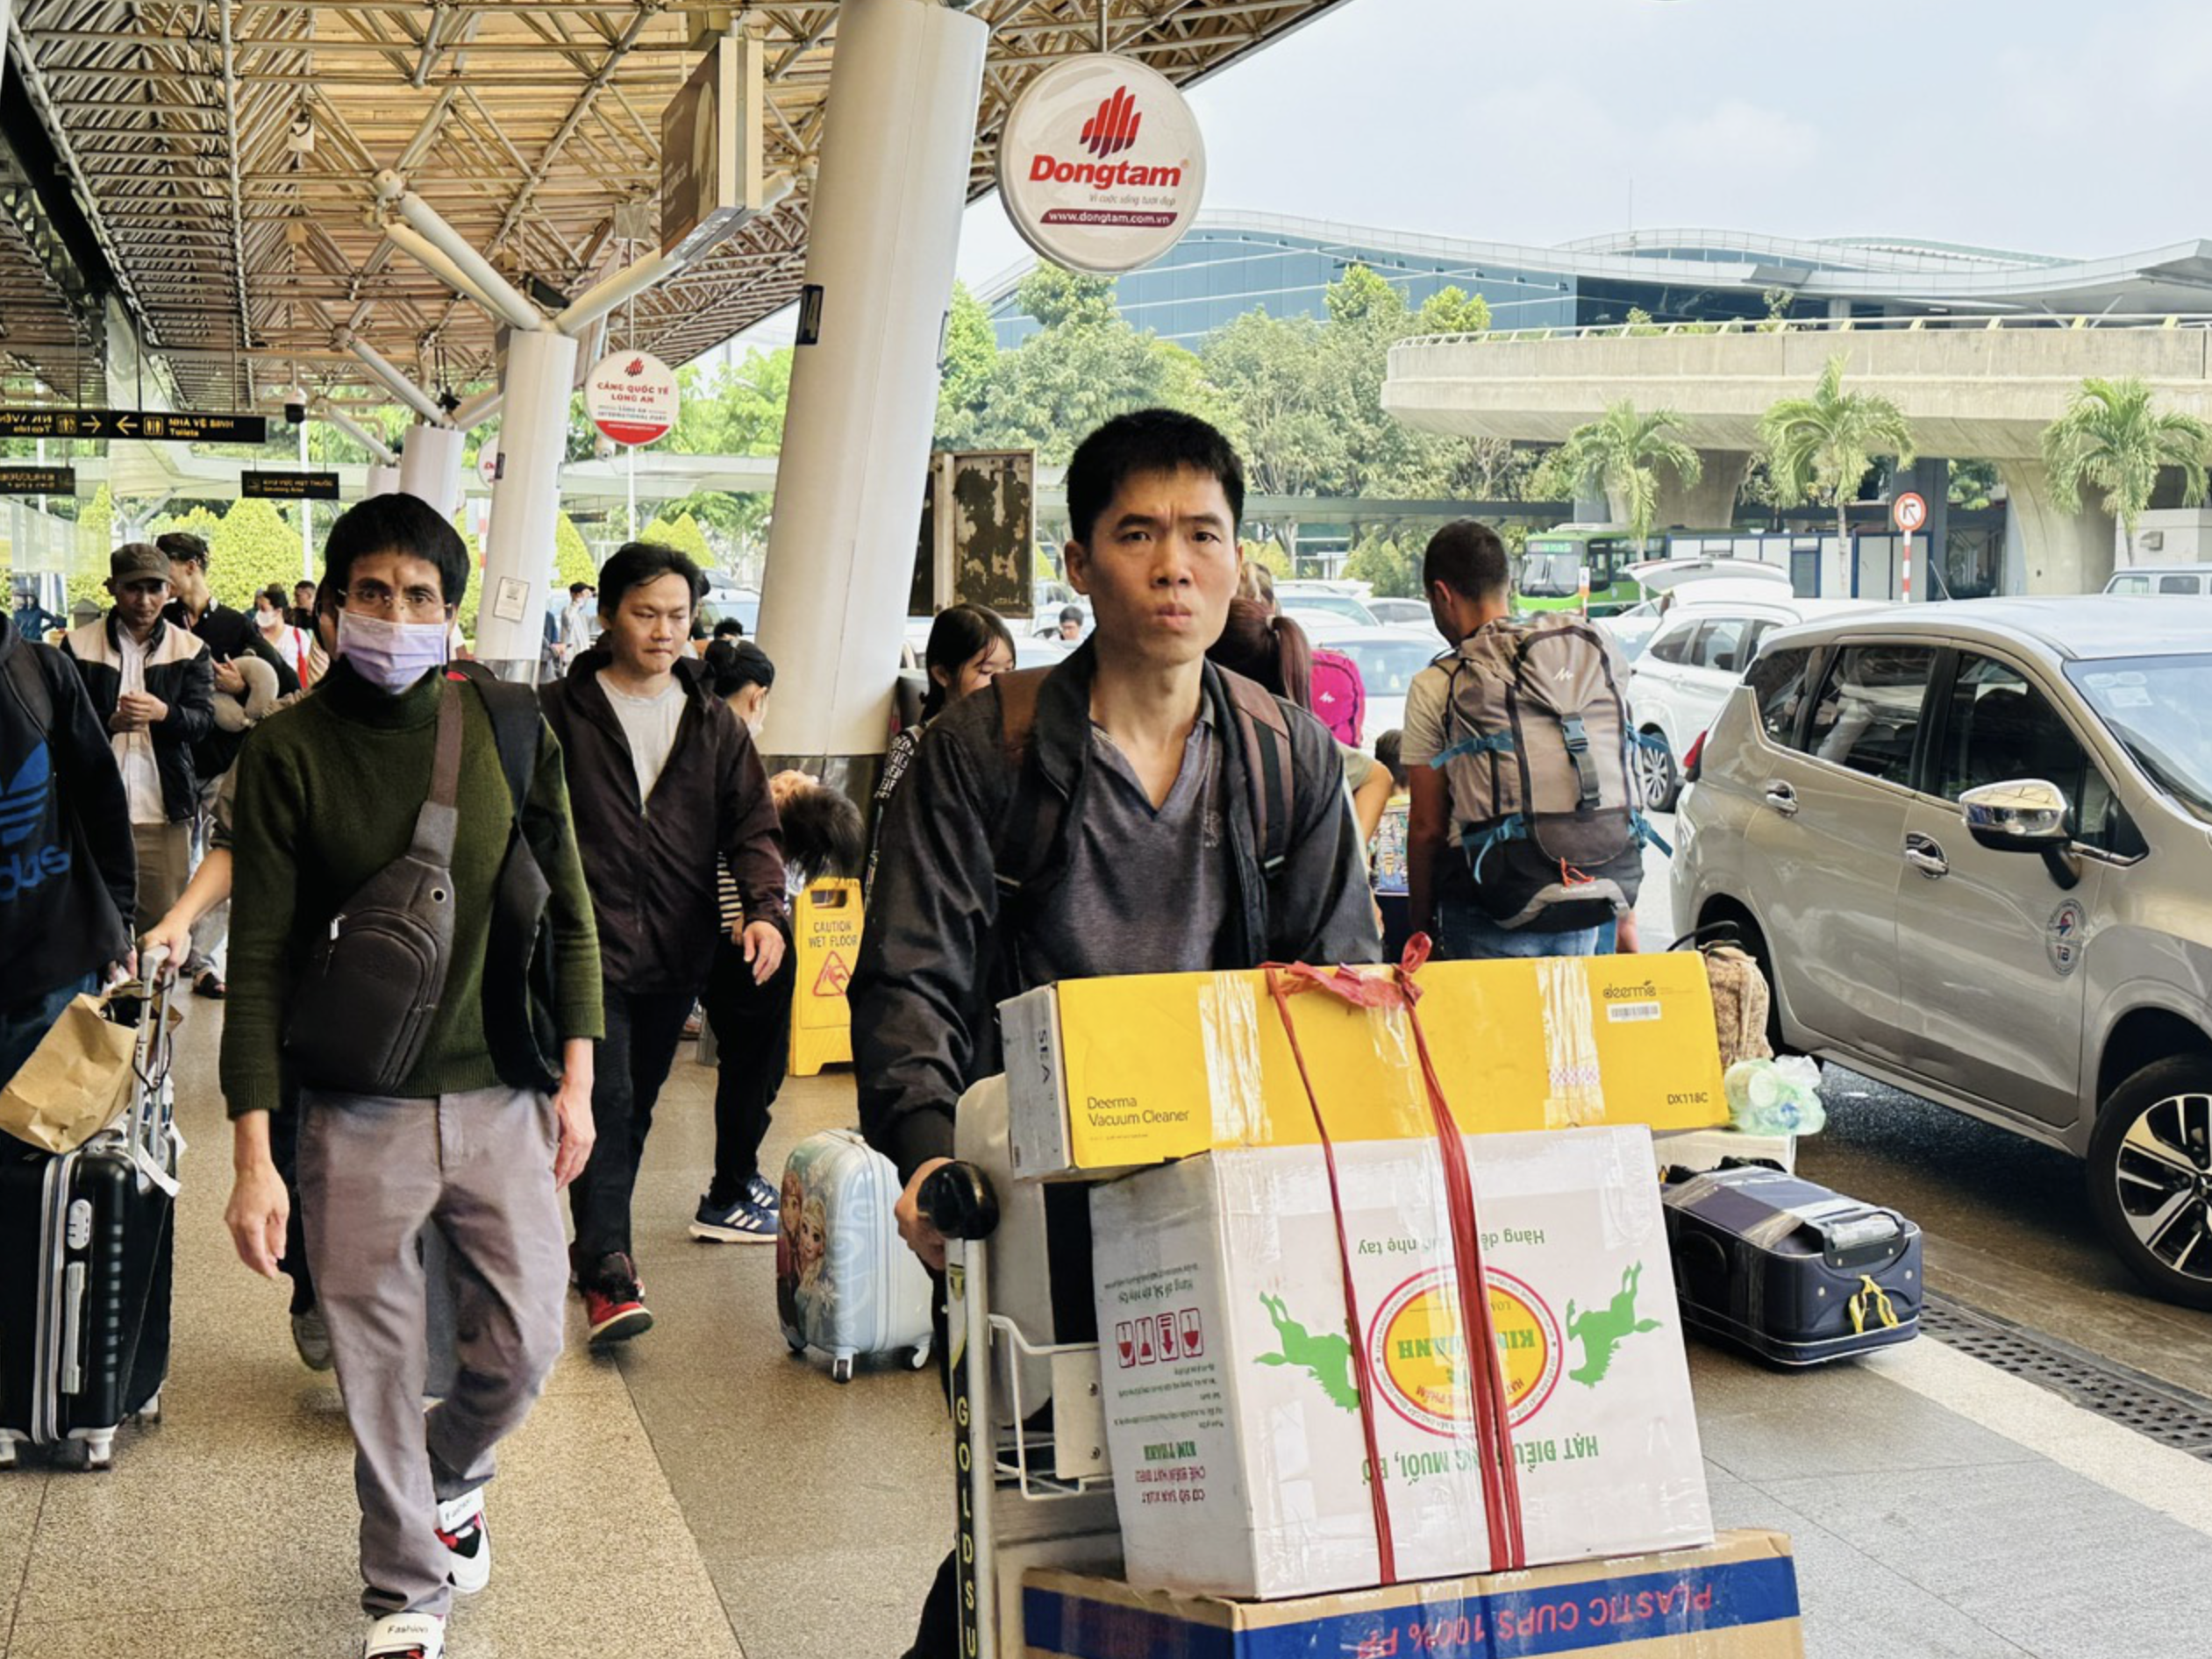 Passengers voice concerns over overcrowding at Ho Chi Minh City airport after Tet